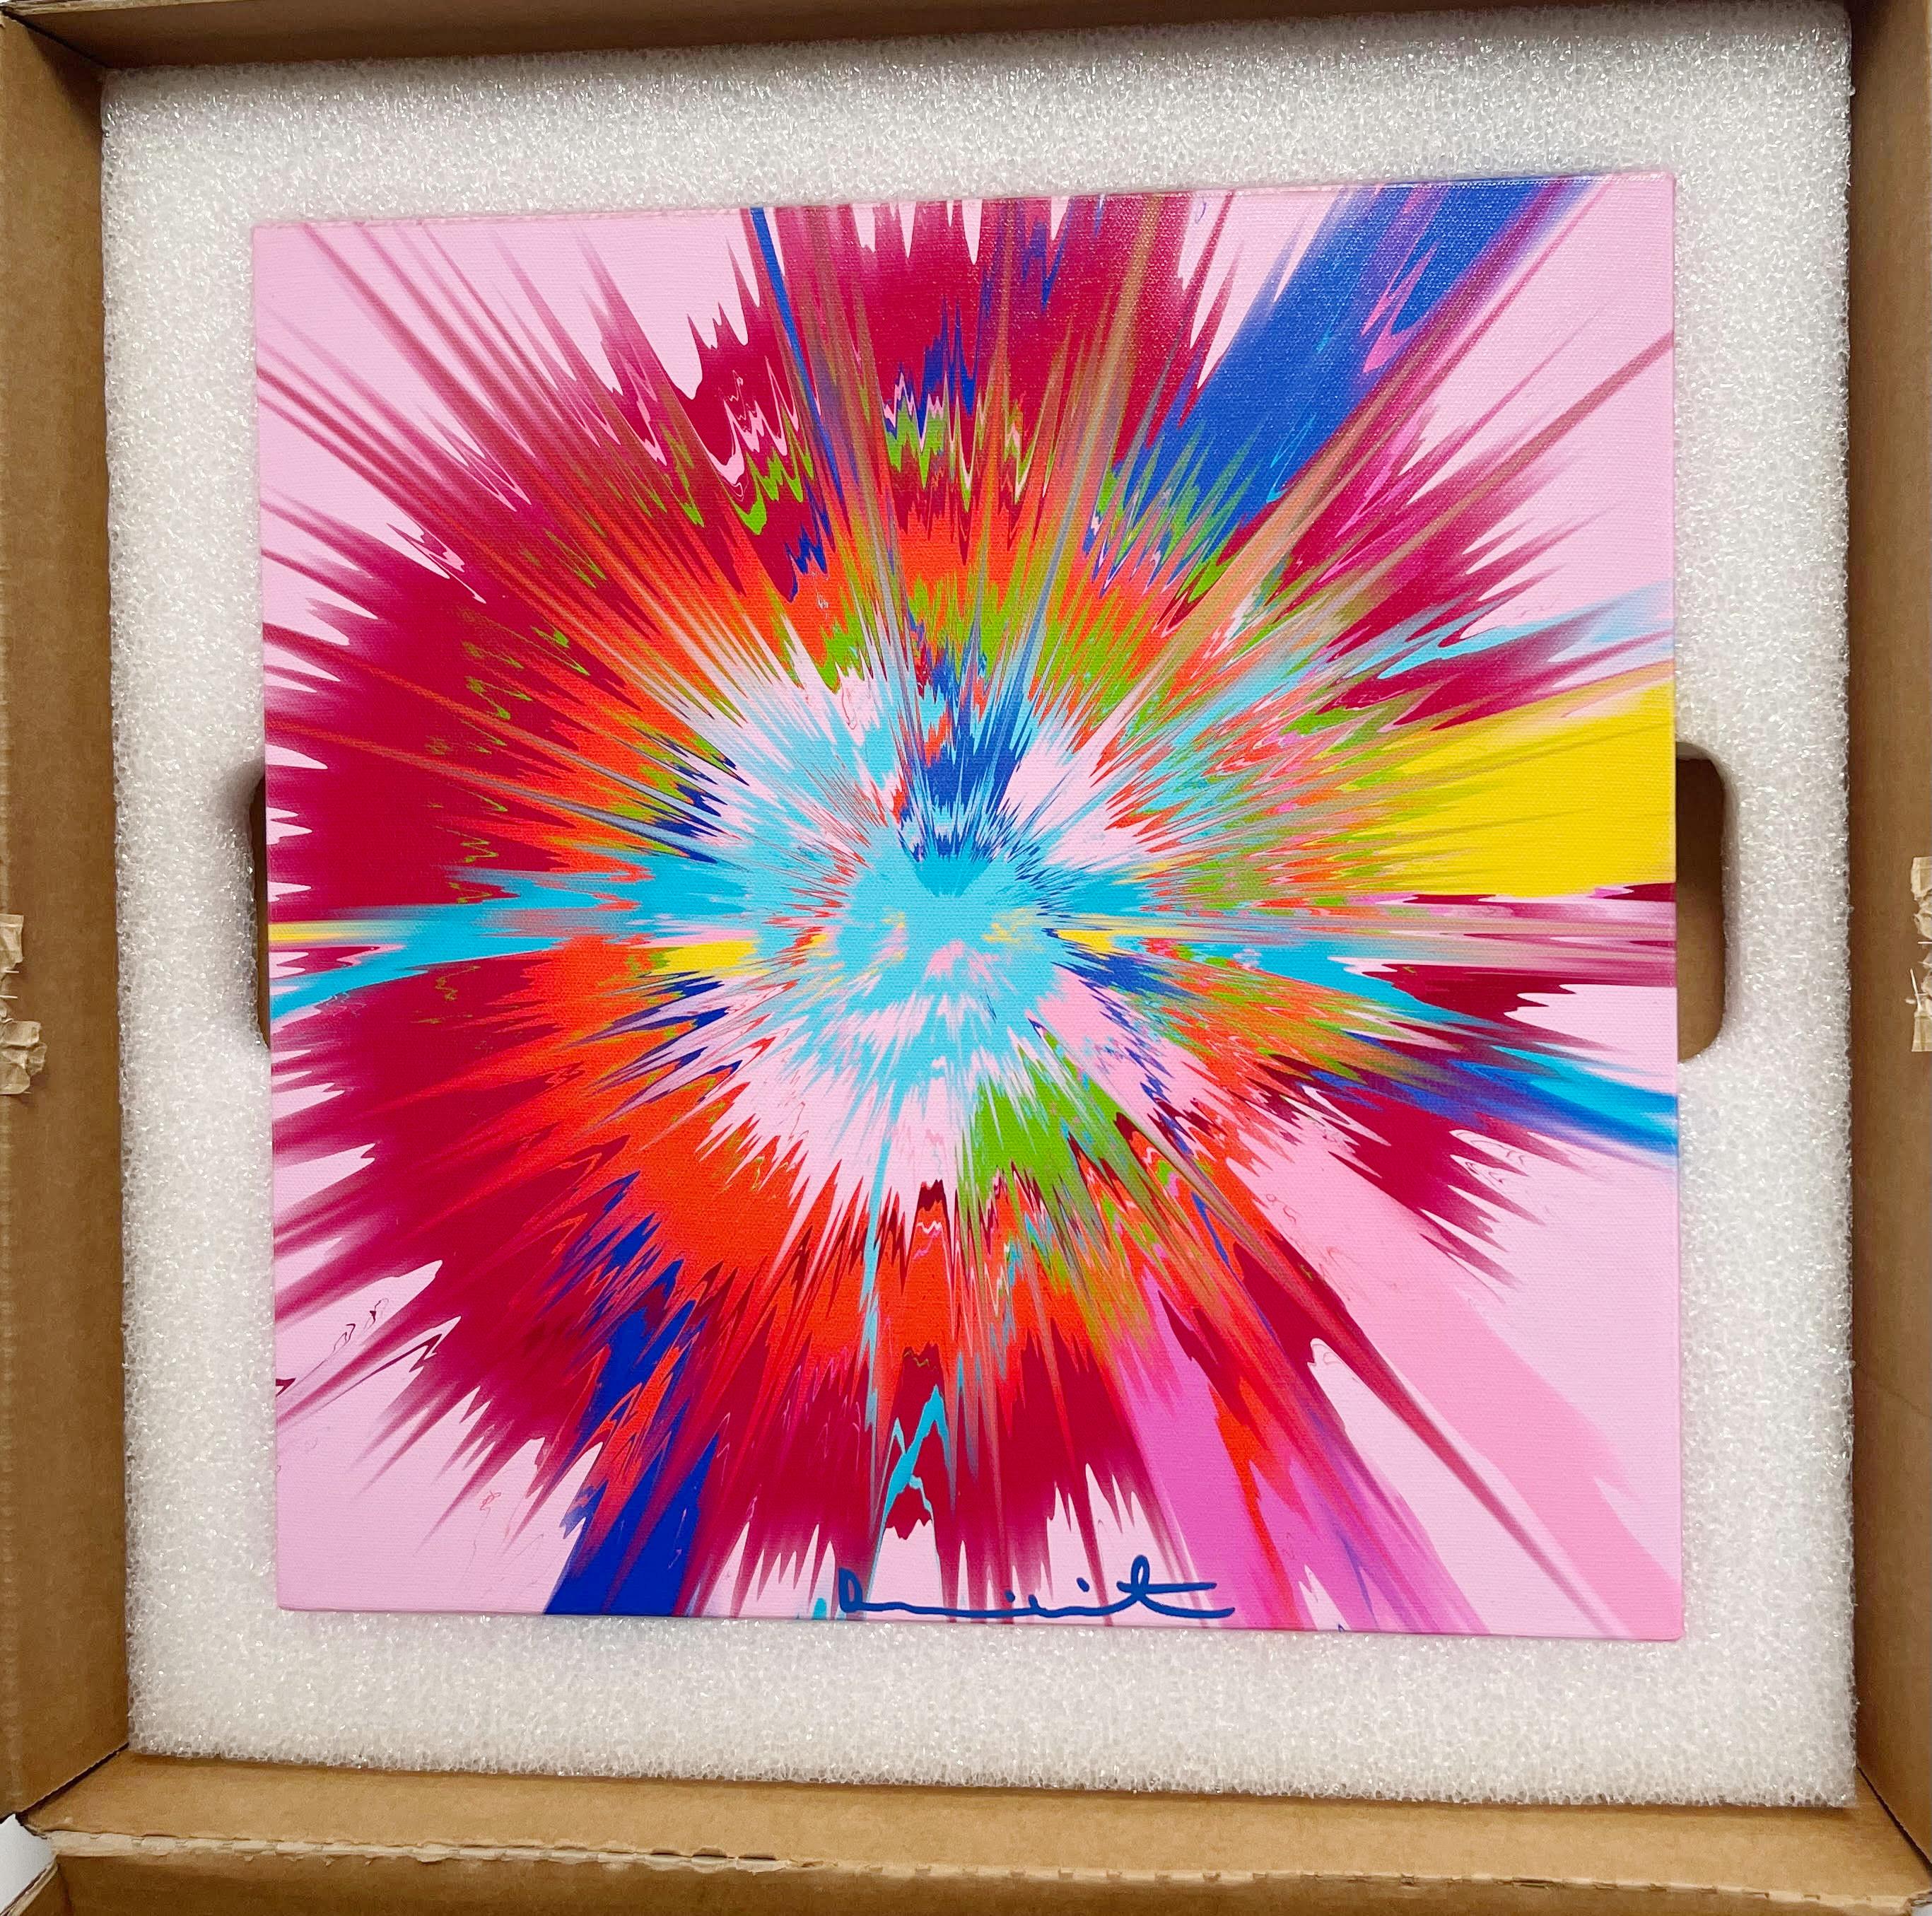 Vapor painting, hand signed 21/230 (Unique variant) from The Beautiful Paintings For Sale 3